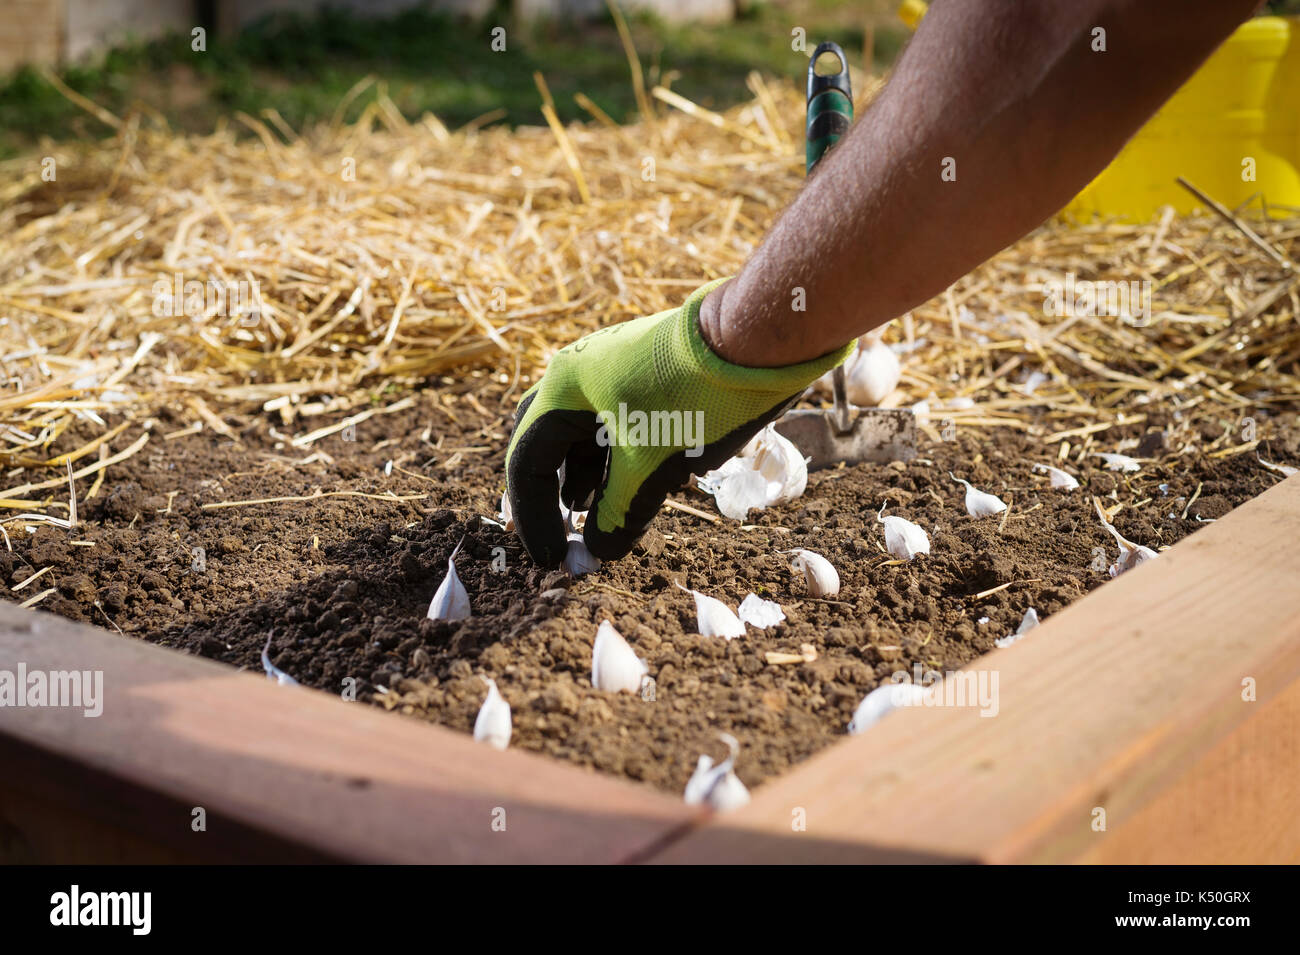 Close up of gloved gardener's hand planting garlic bulbs in wooden gaden raised bed covered in straw mulch. Stock Photo